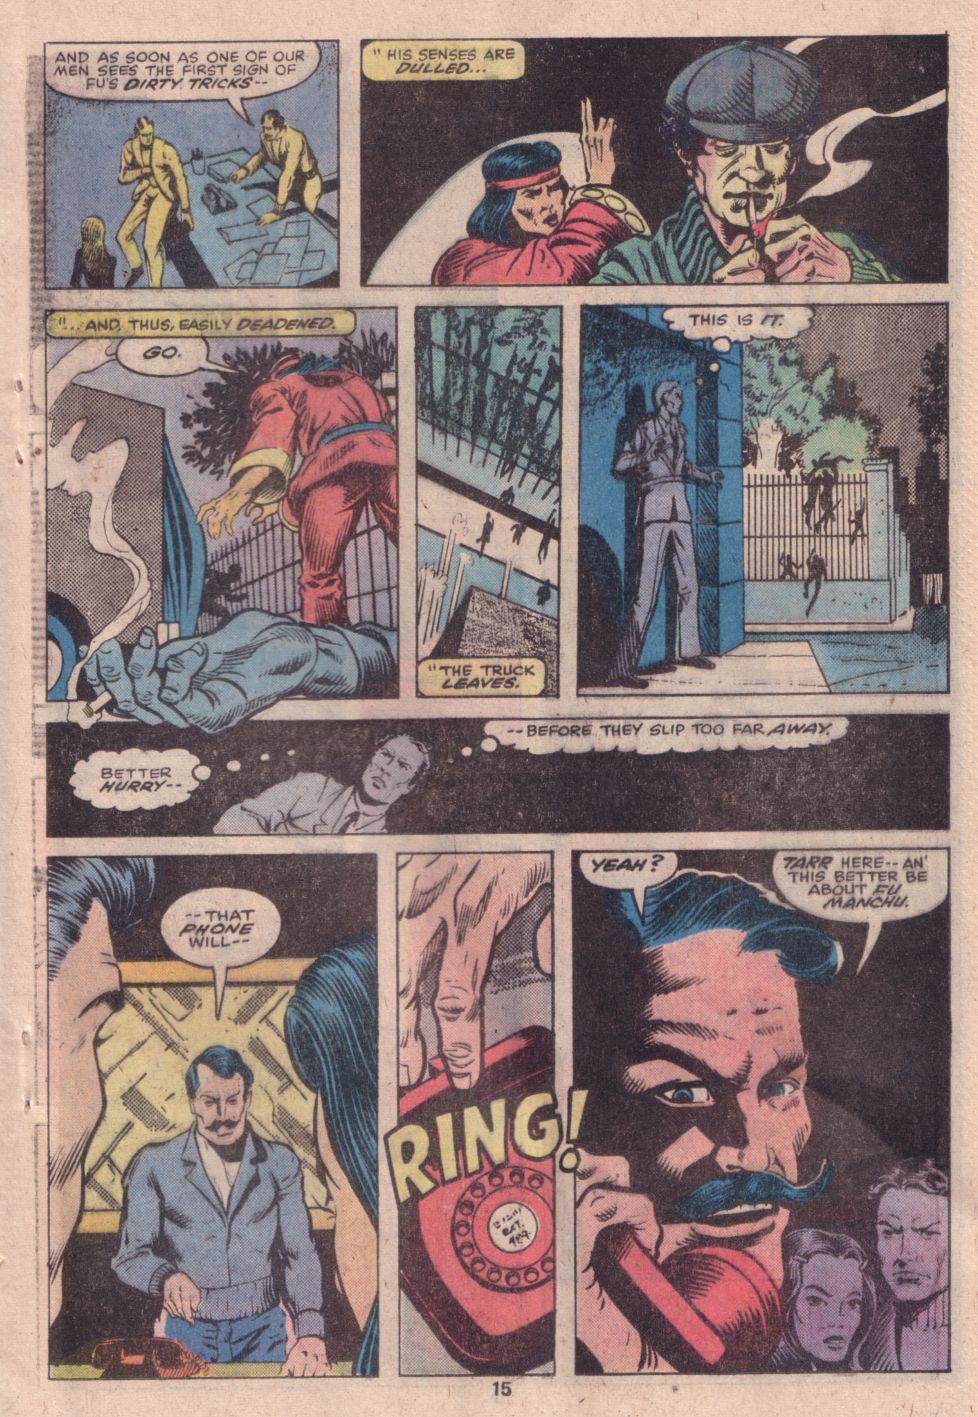 What If? (1977) issue 16 - Shang Chi Master of Kung Fu fought on The side of Fu Manchu - Page 12